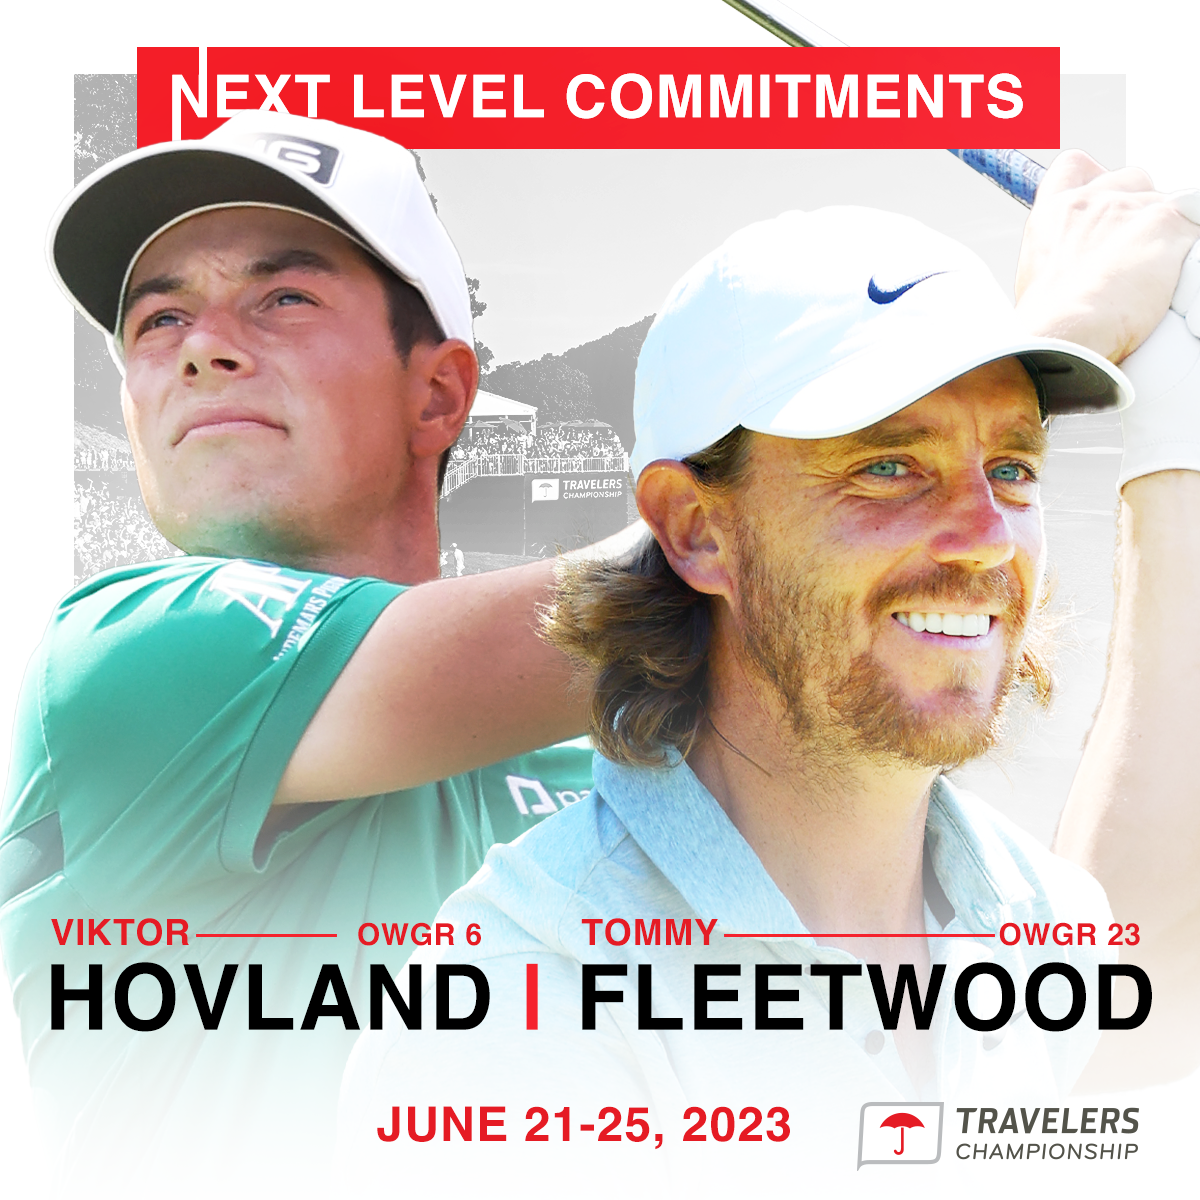 VIKTOR HOVLAND AND TOMMY FLEETWOOD WILL BE PART OF THE 2023 TRAVELERS